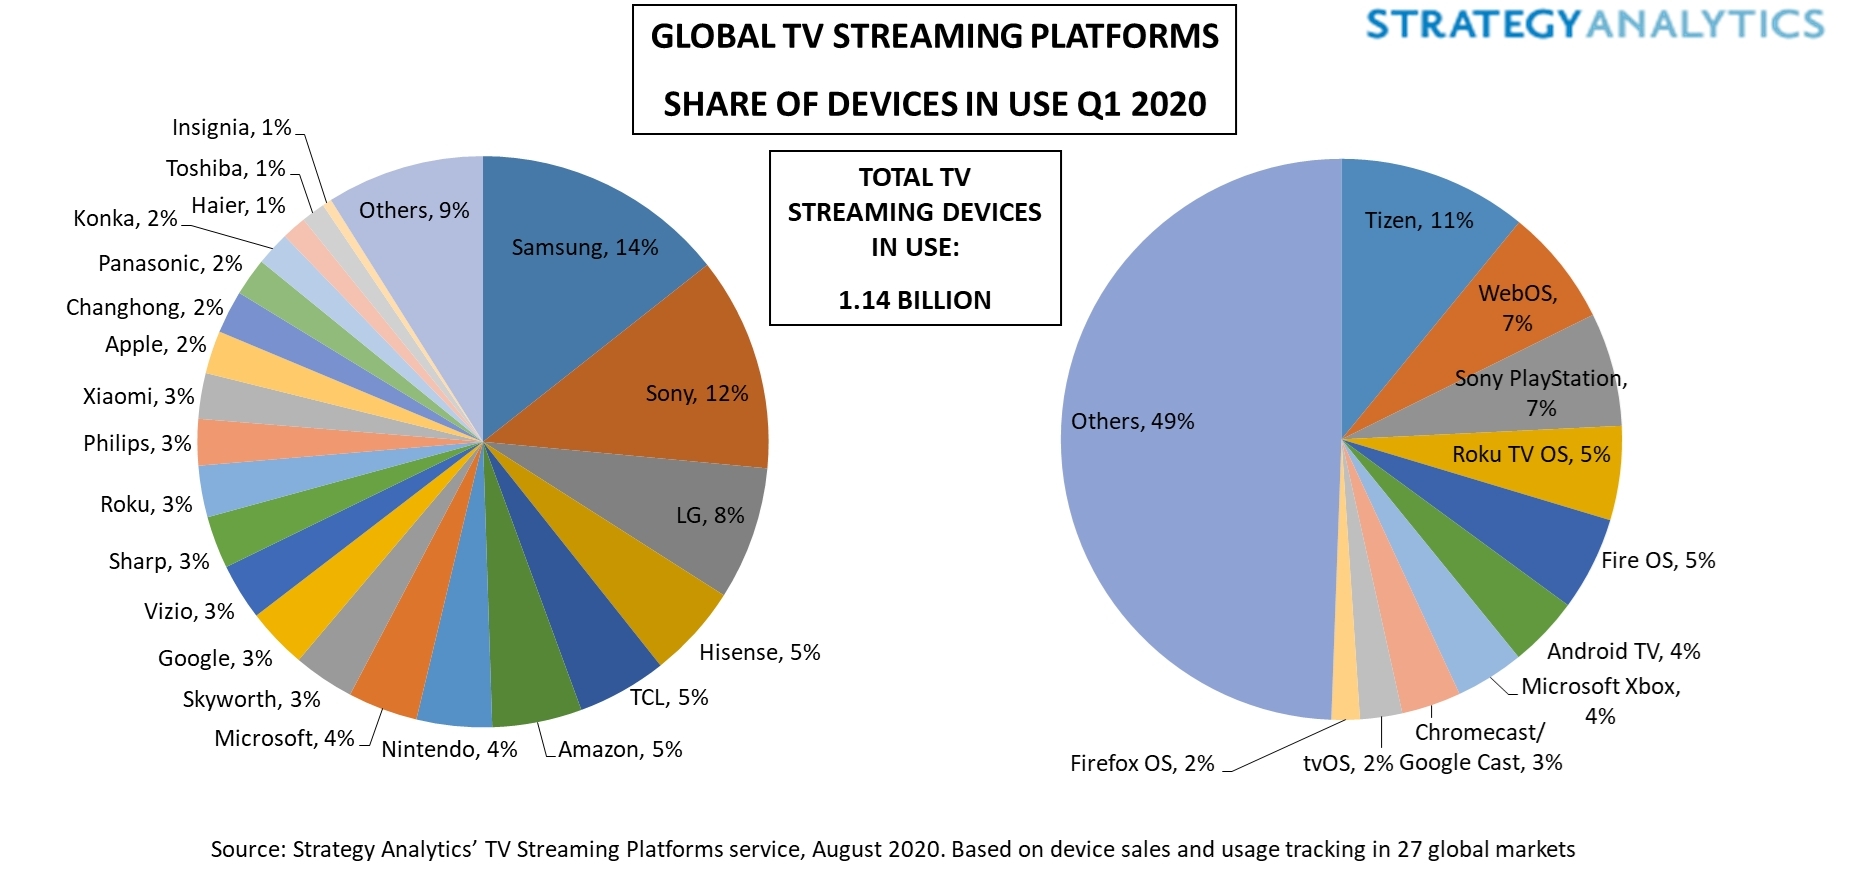 Figure_1._Global_TV_Streaming_Platforms_Share_of_Devices_in_Use_Q1_2020.jpg